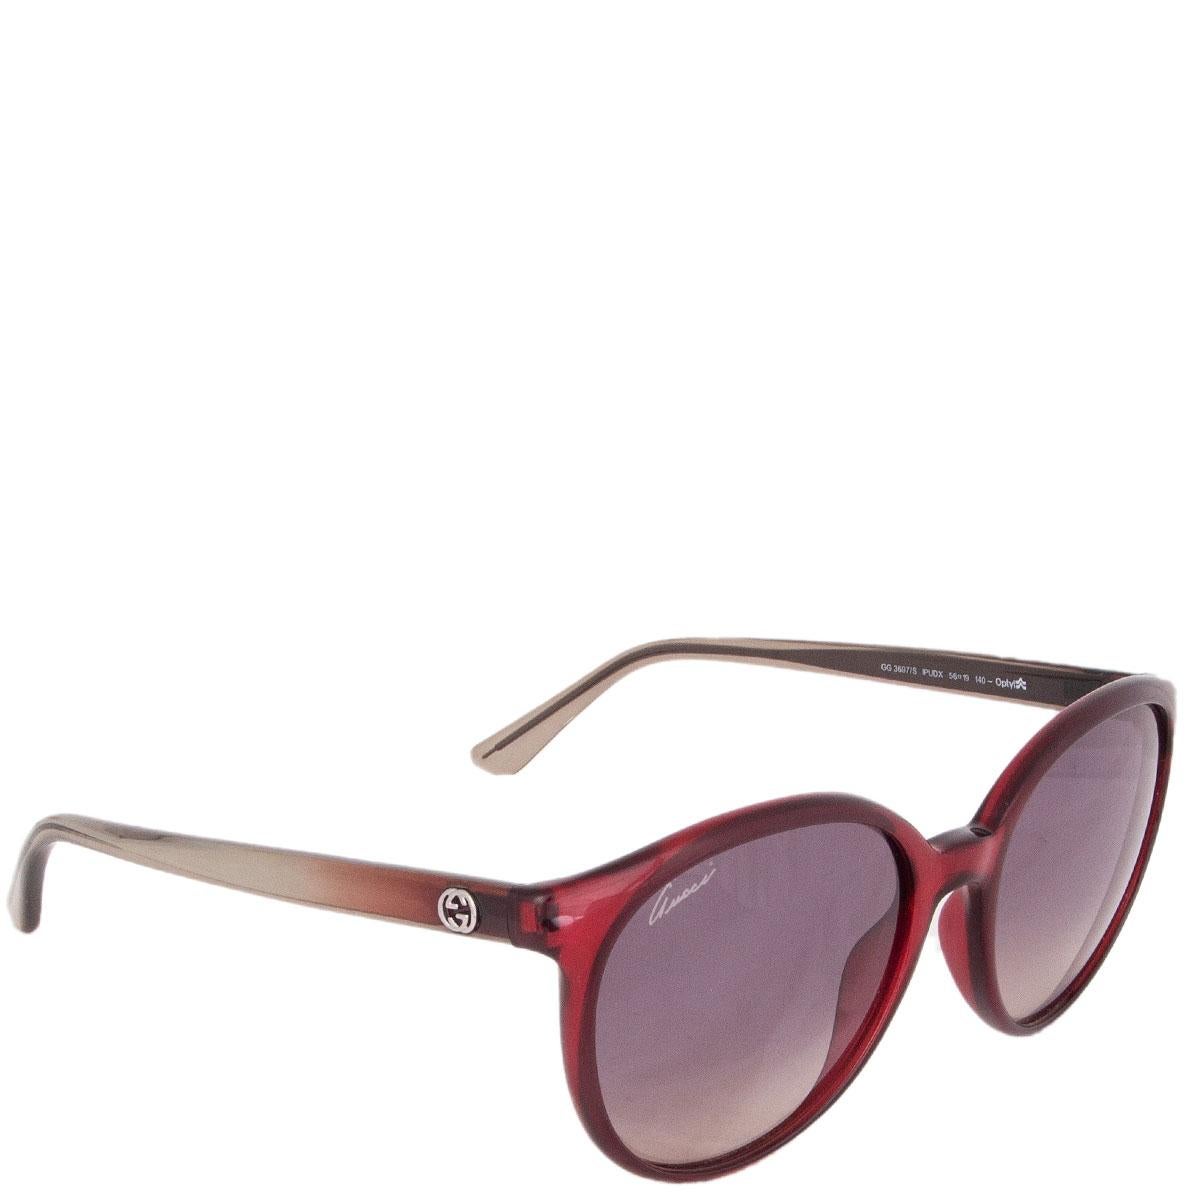 100% authentic Gucci GG 3697/S sunglasses in transparent burgundy aceate with gradient grey lenses. Have been worn and are in excellent condition. No case.

Model	GG 3697/S IPUDX 56-19 140
Width	14.5cm (5.7in)
Height	5.5cm (2.1in)

All our listings